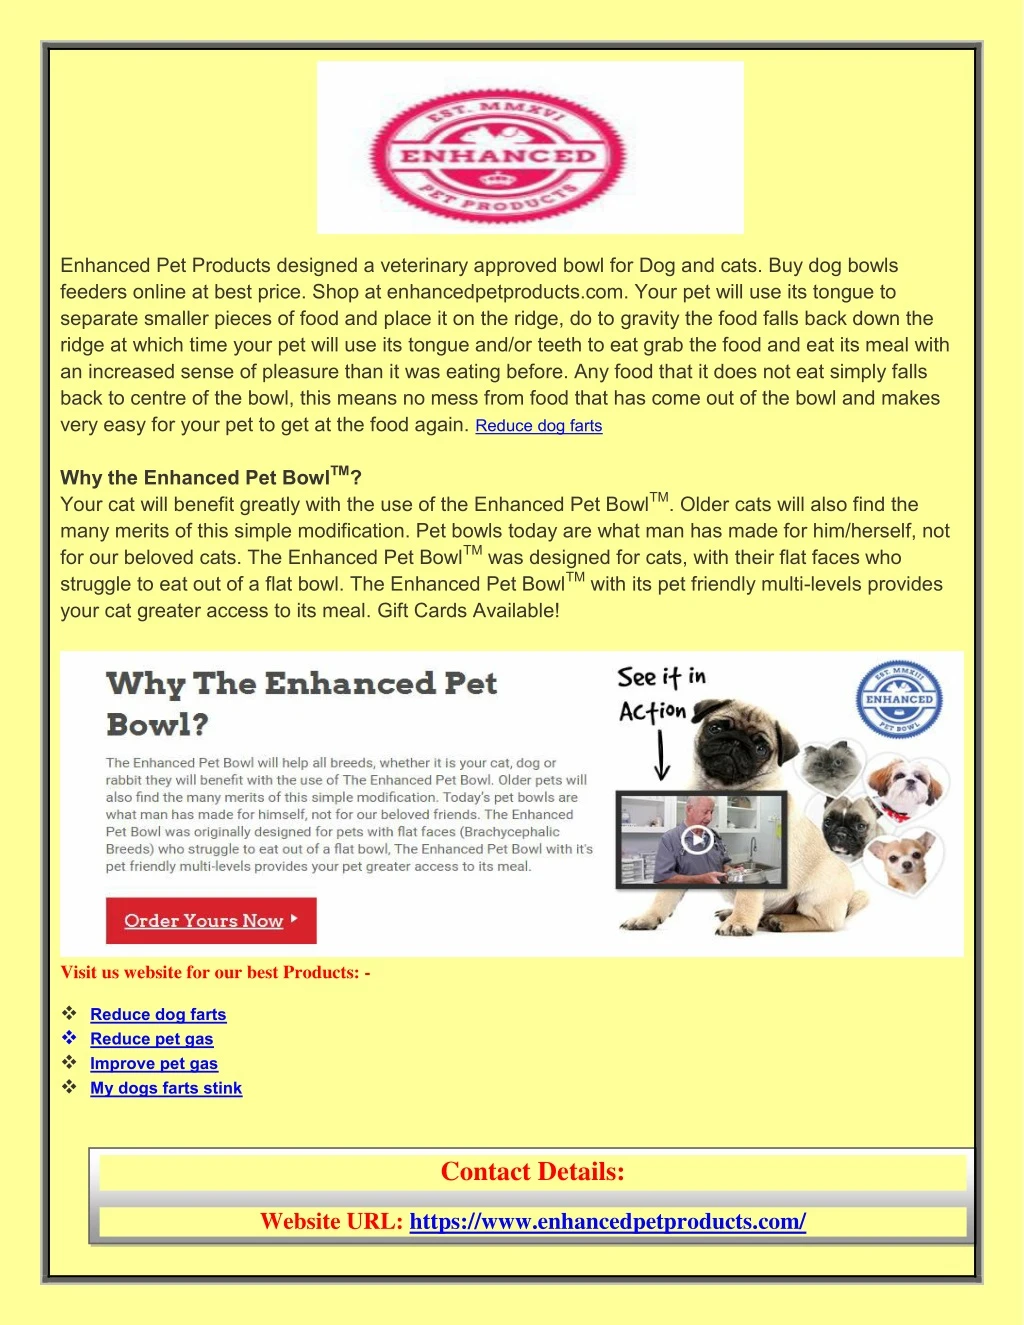 enhanced pet products designed a veterinary